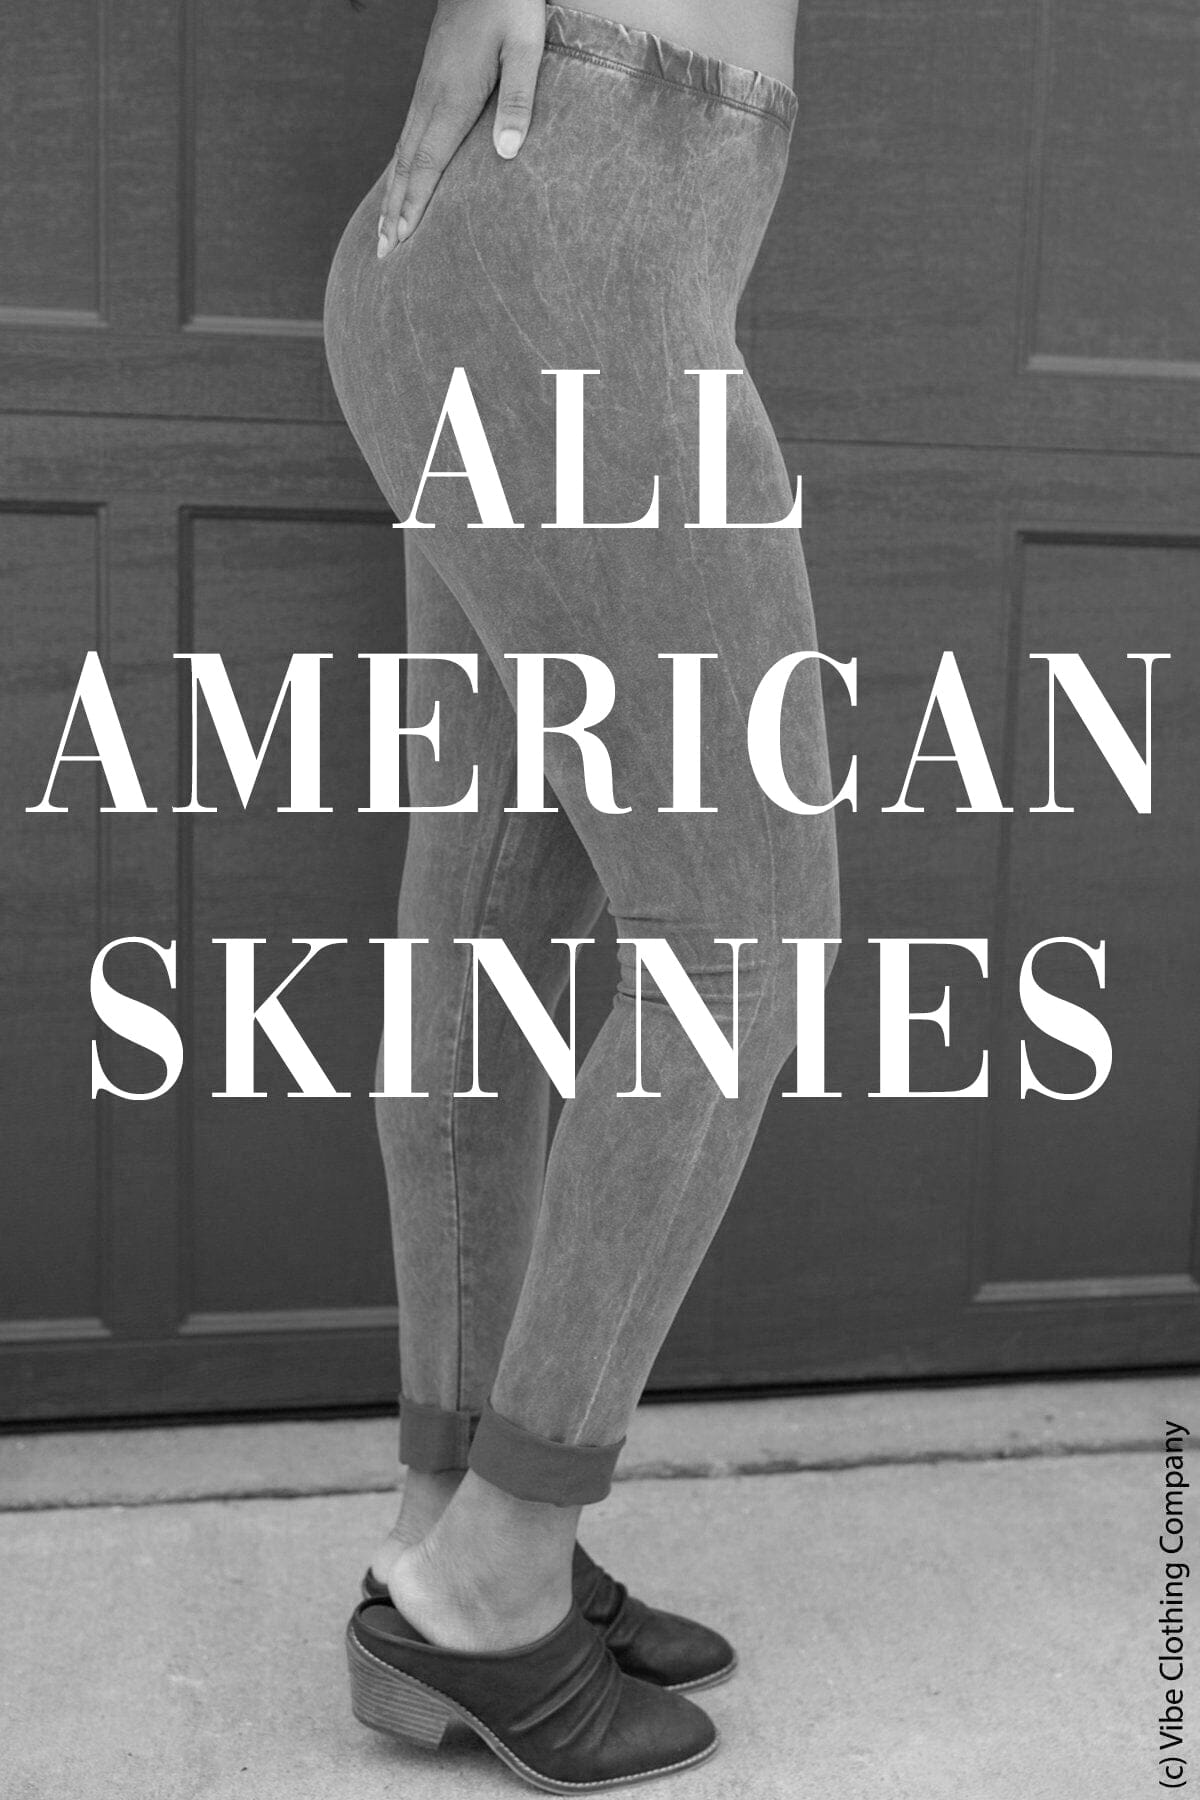 All American Skinnies - Group Bottoms chatoyant 